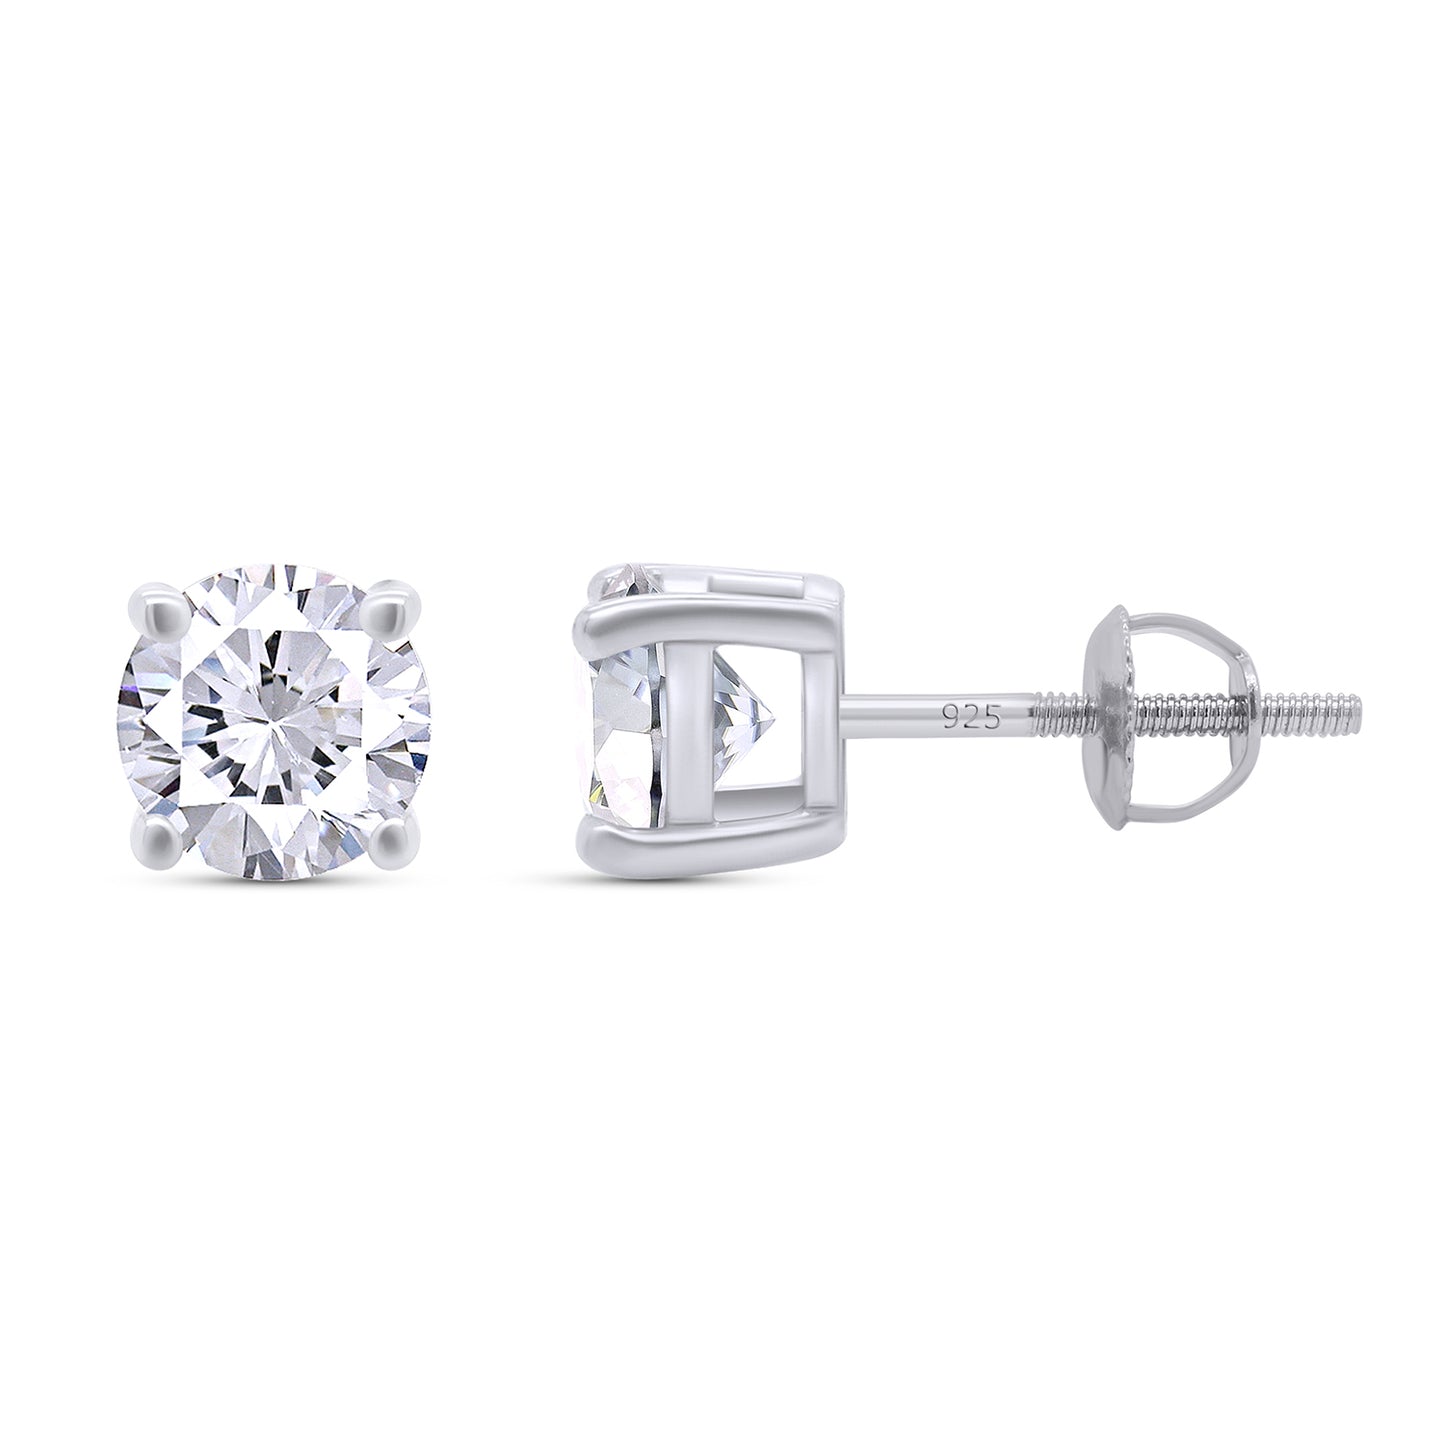 7.5MM Round Lab Created Moissanite Diamond Solitaire Stud Earrings for Women In 925 Sterling Silver